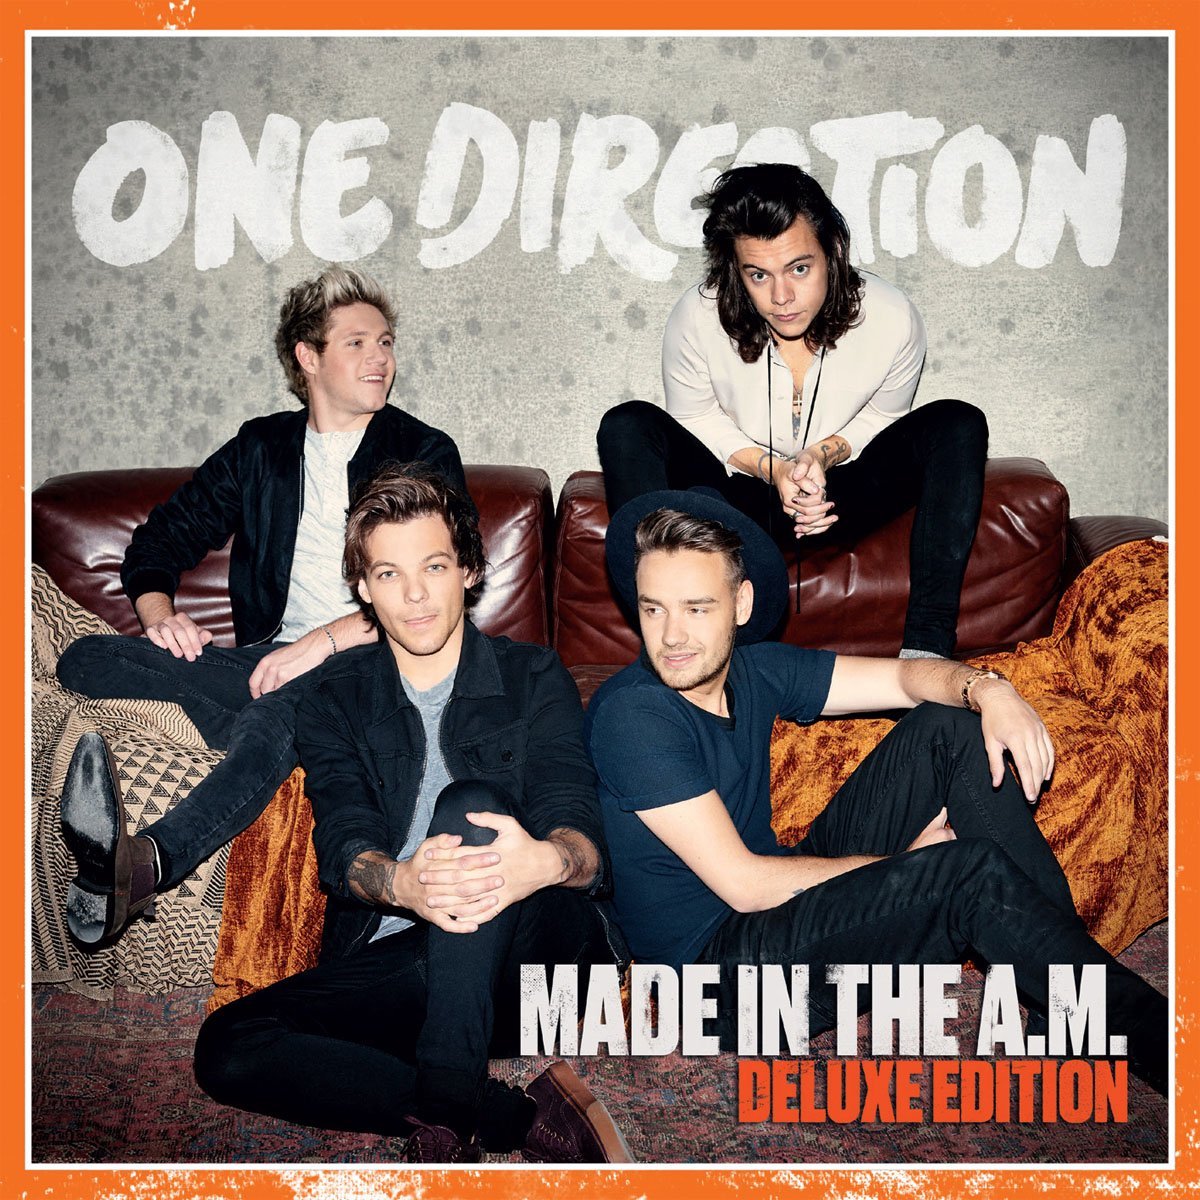 made in the am album sales